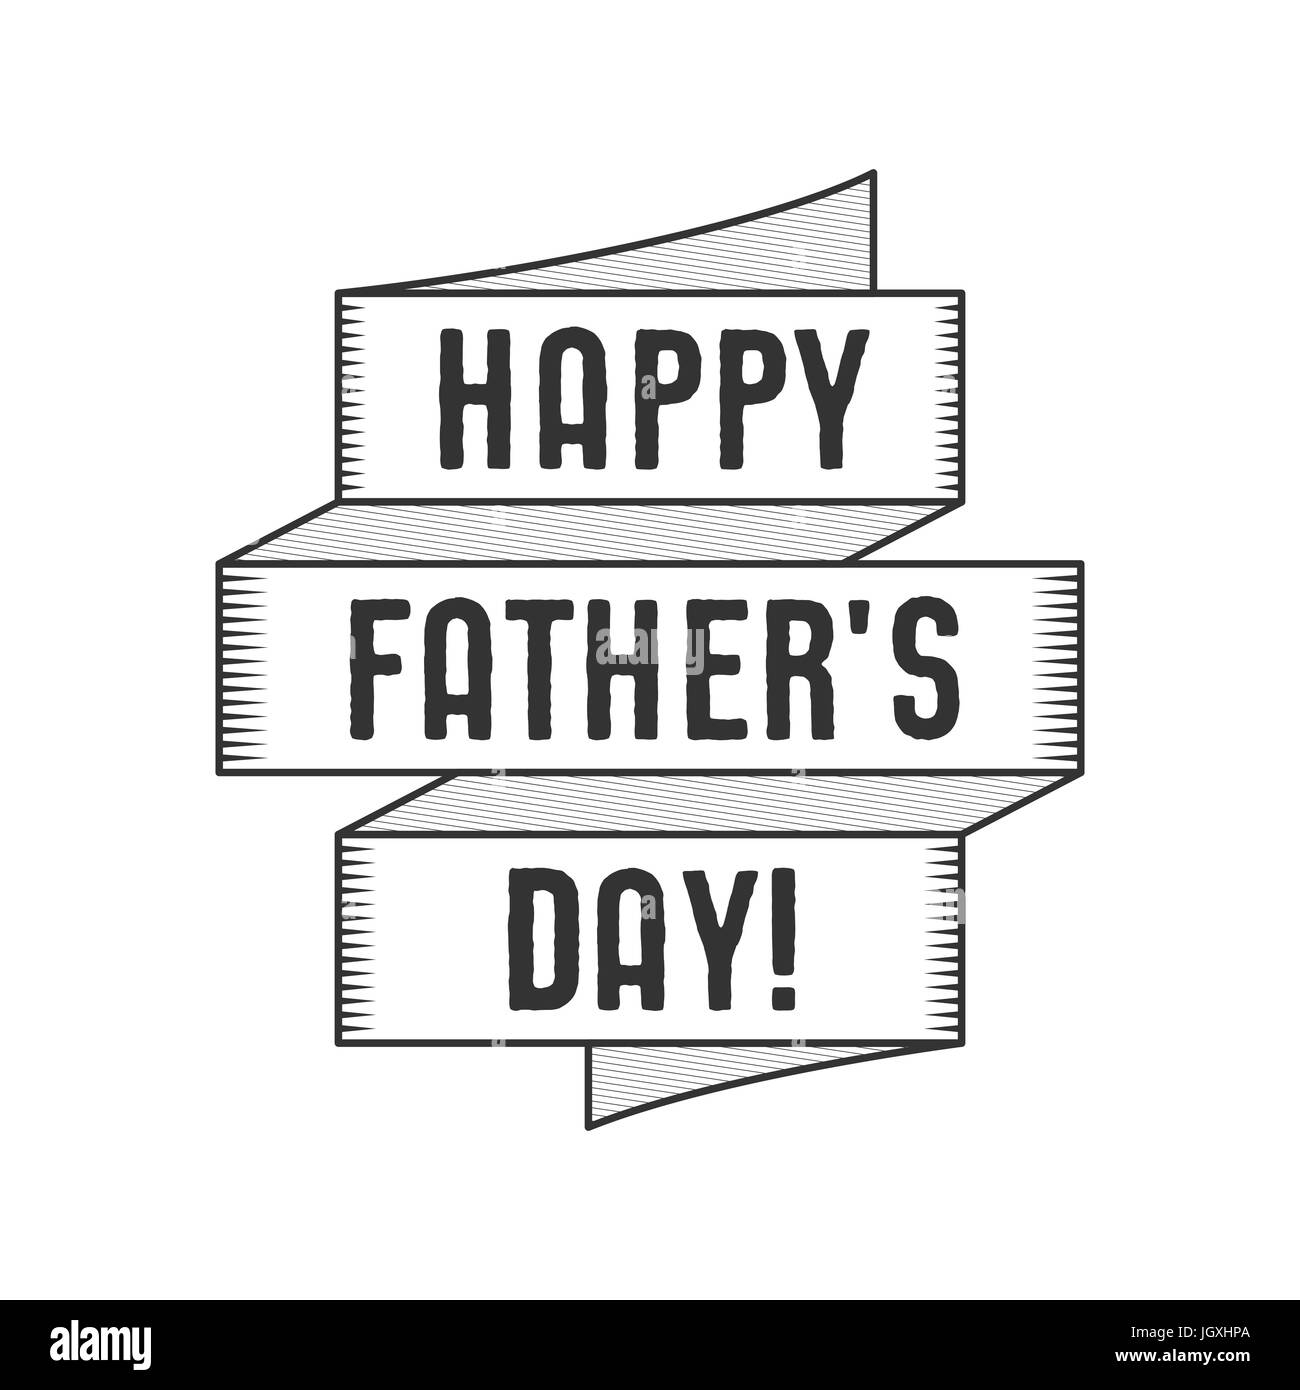 Happy Fathers Day Typography label with ribbon and texts. Stock ...